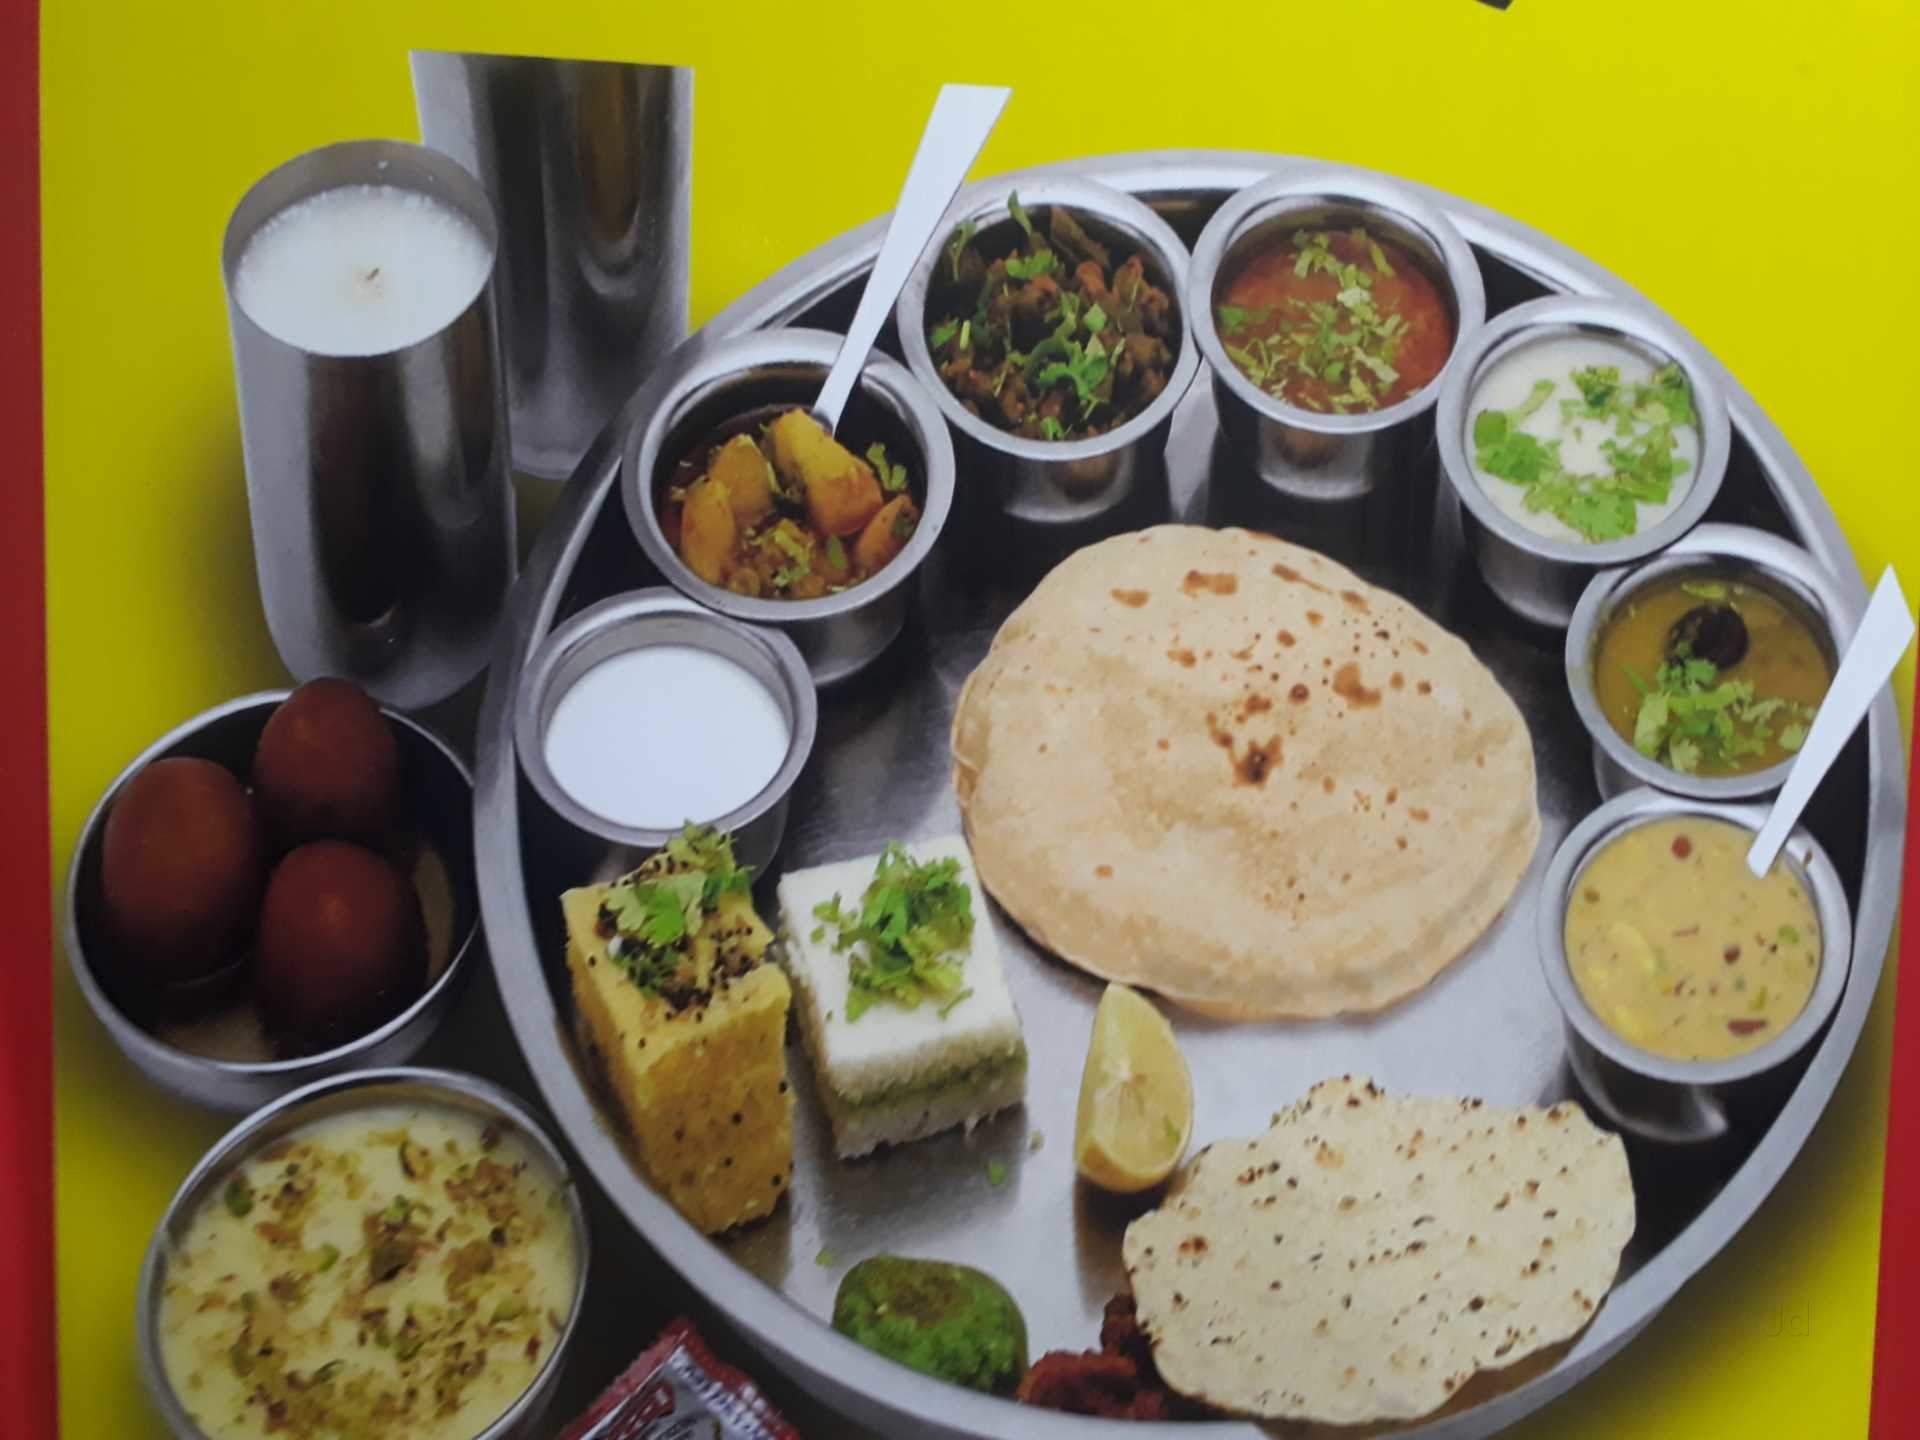 Meet Your Food Demands Through Train E-Catering Service